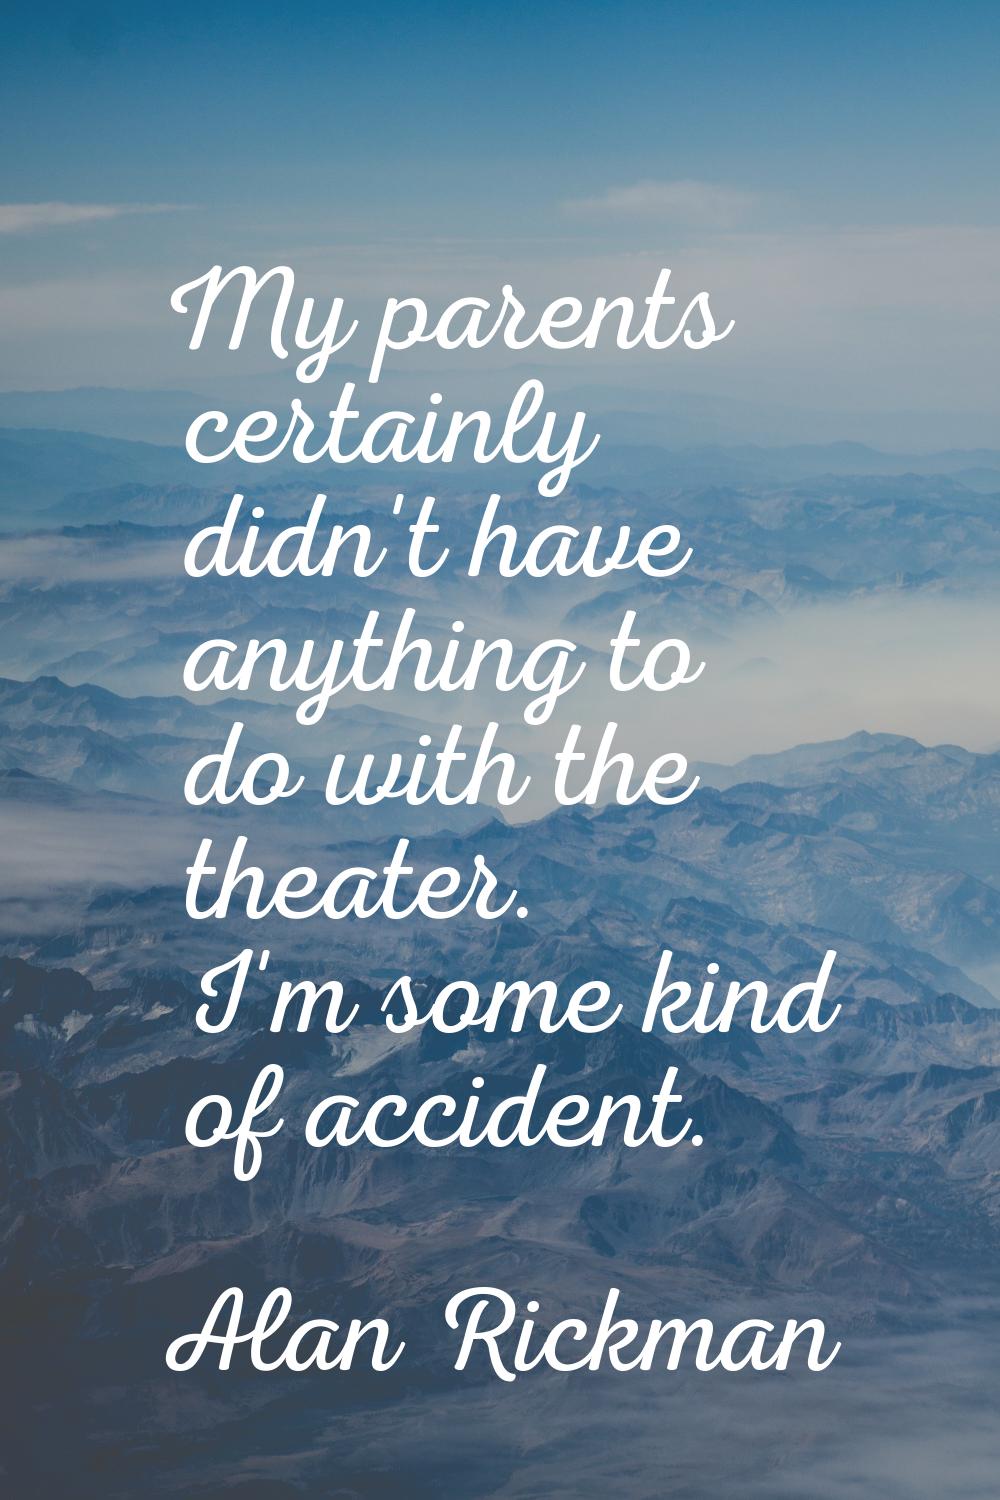 My parents certainly didn't have anything to do with the theater. I'm some kind of accident.